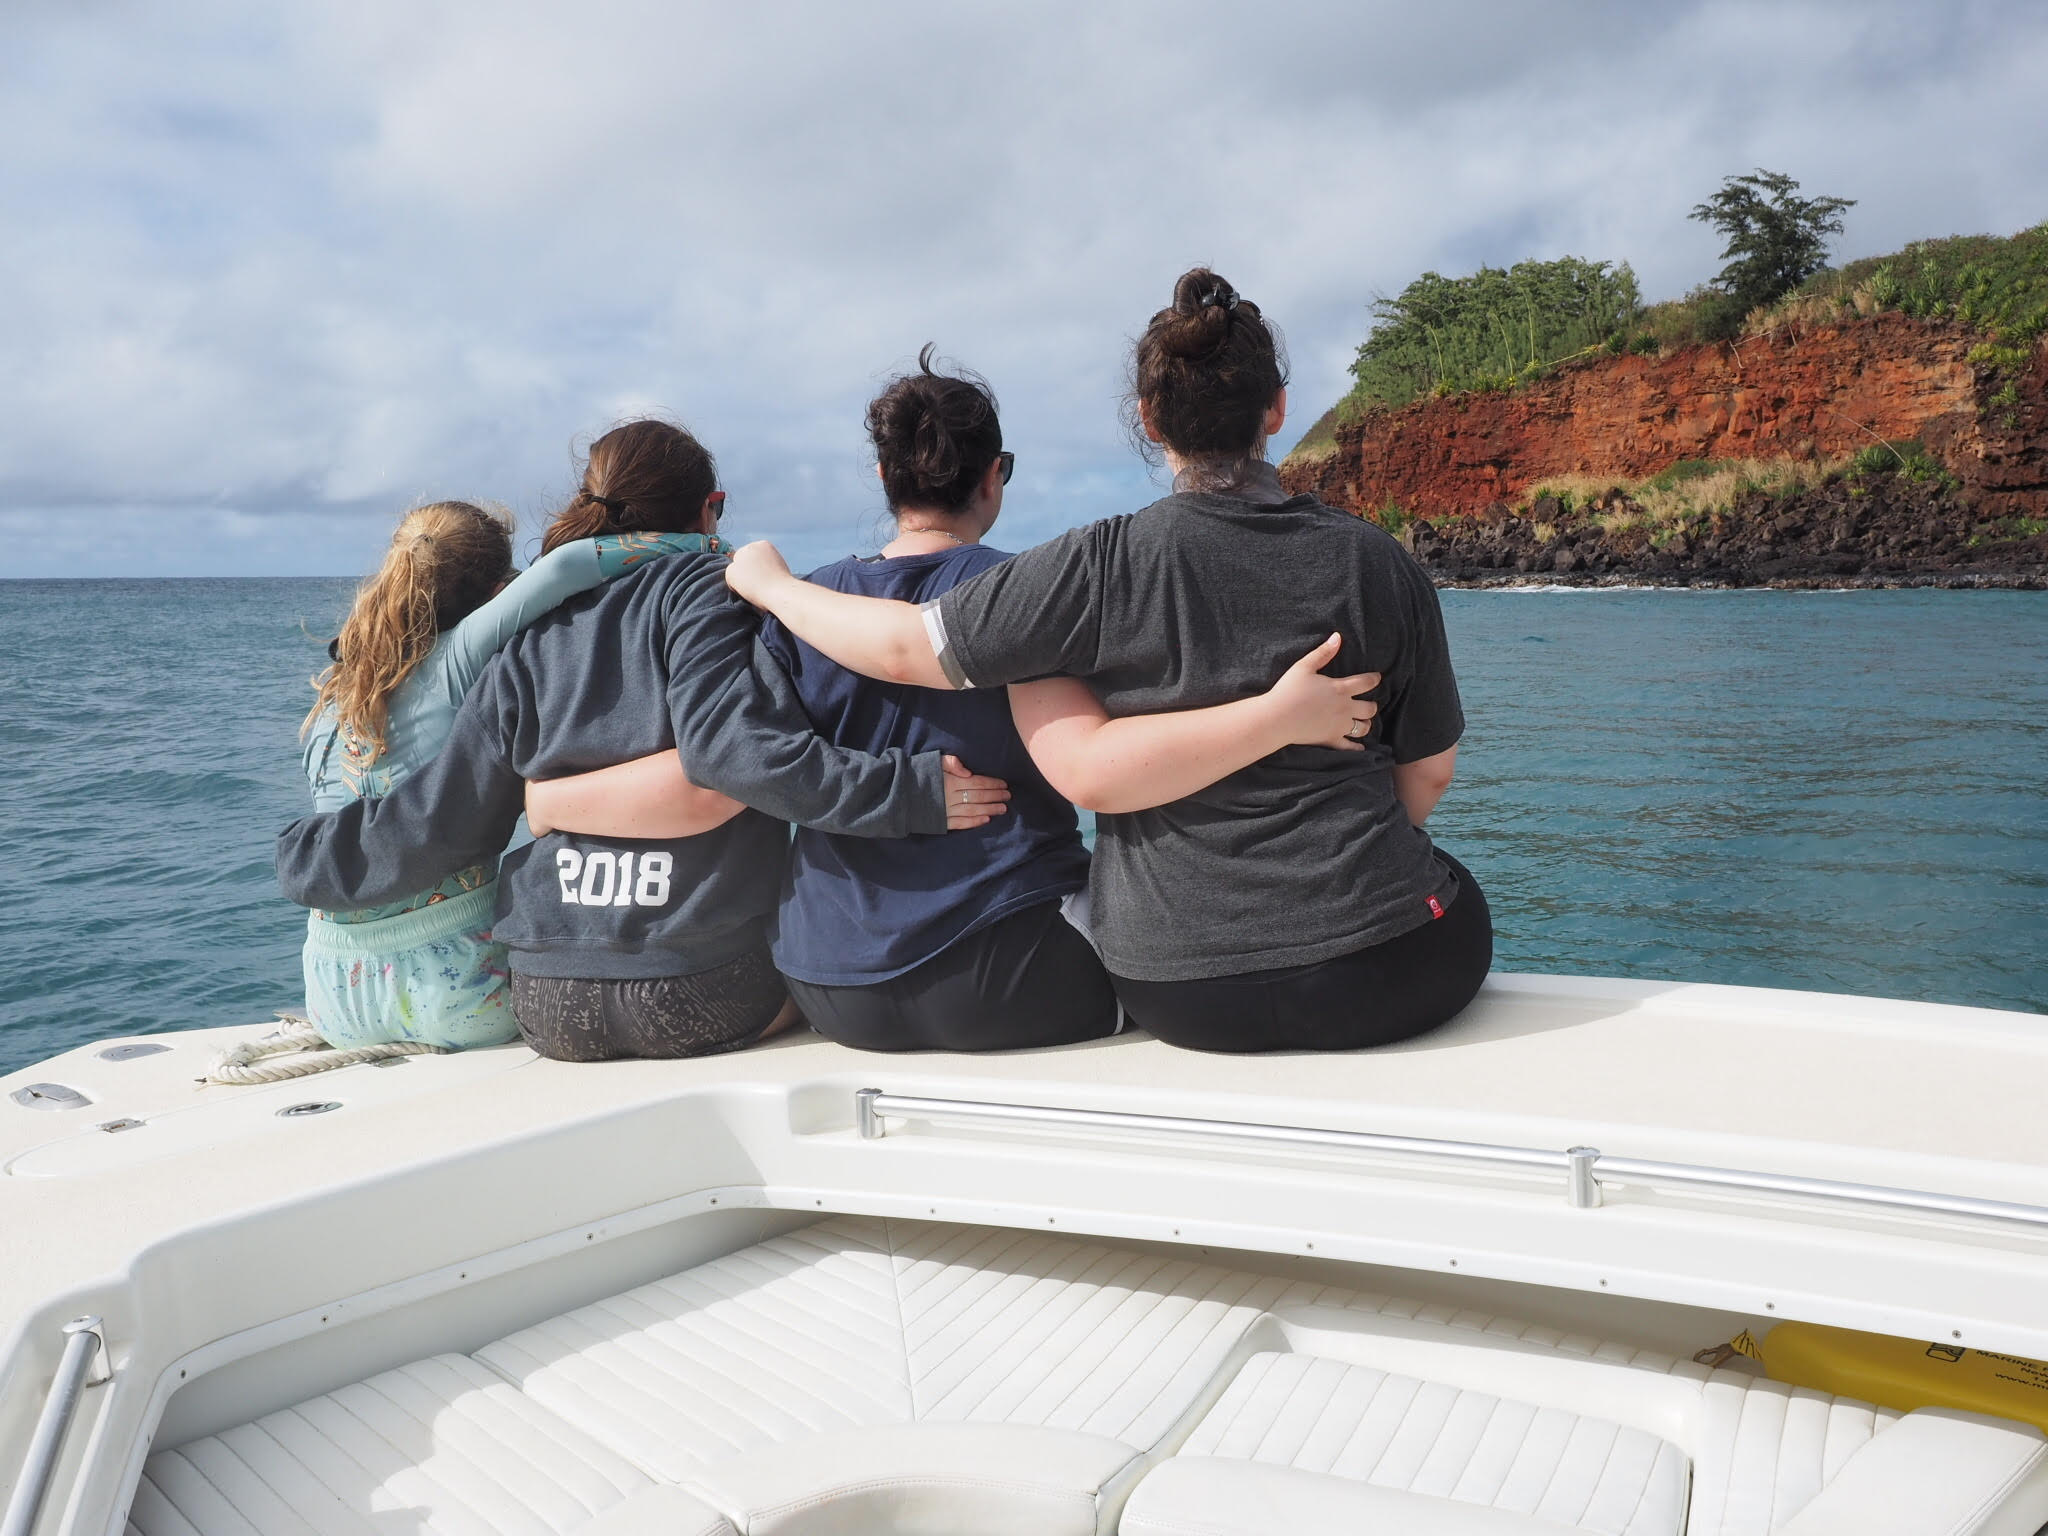 Ellie Harrison and her three sisters sitting on a boat with their backs to the camera.